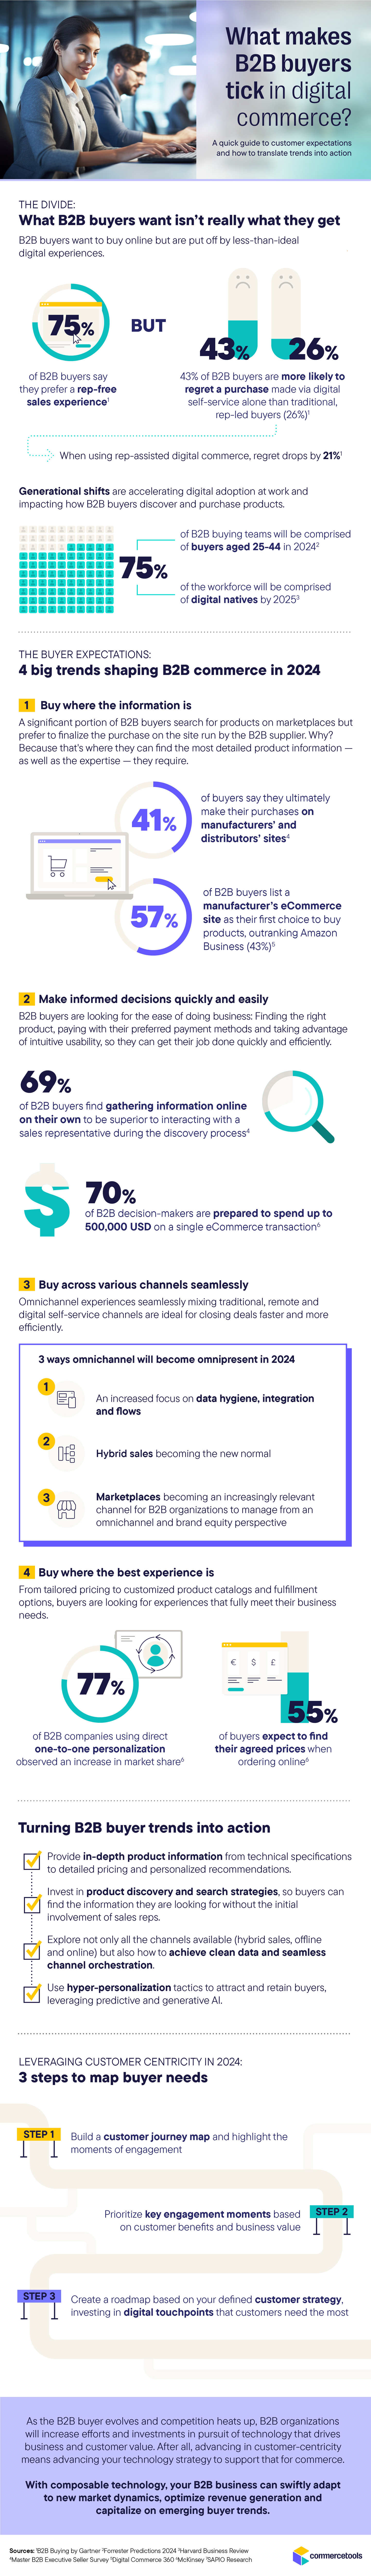 An infographic on B2B customer expectations and how to translate trends into action